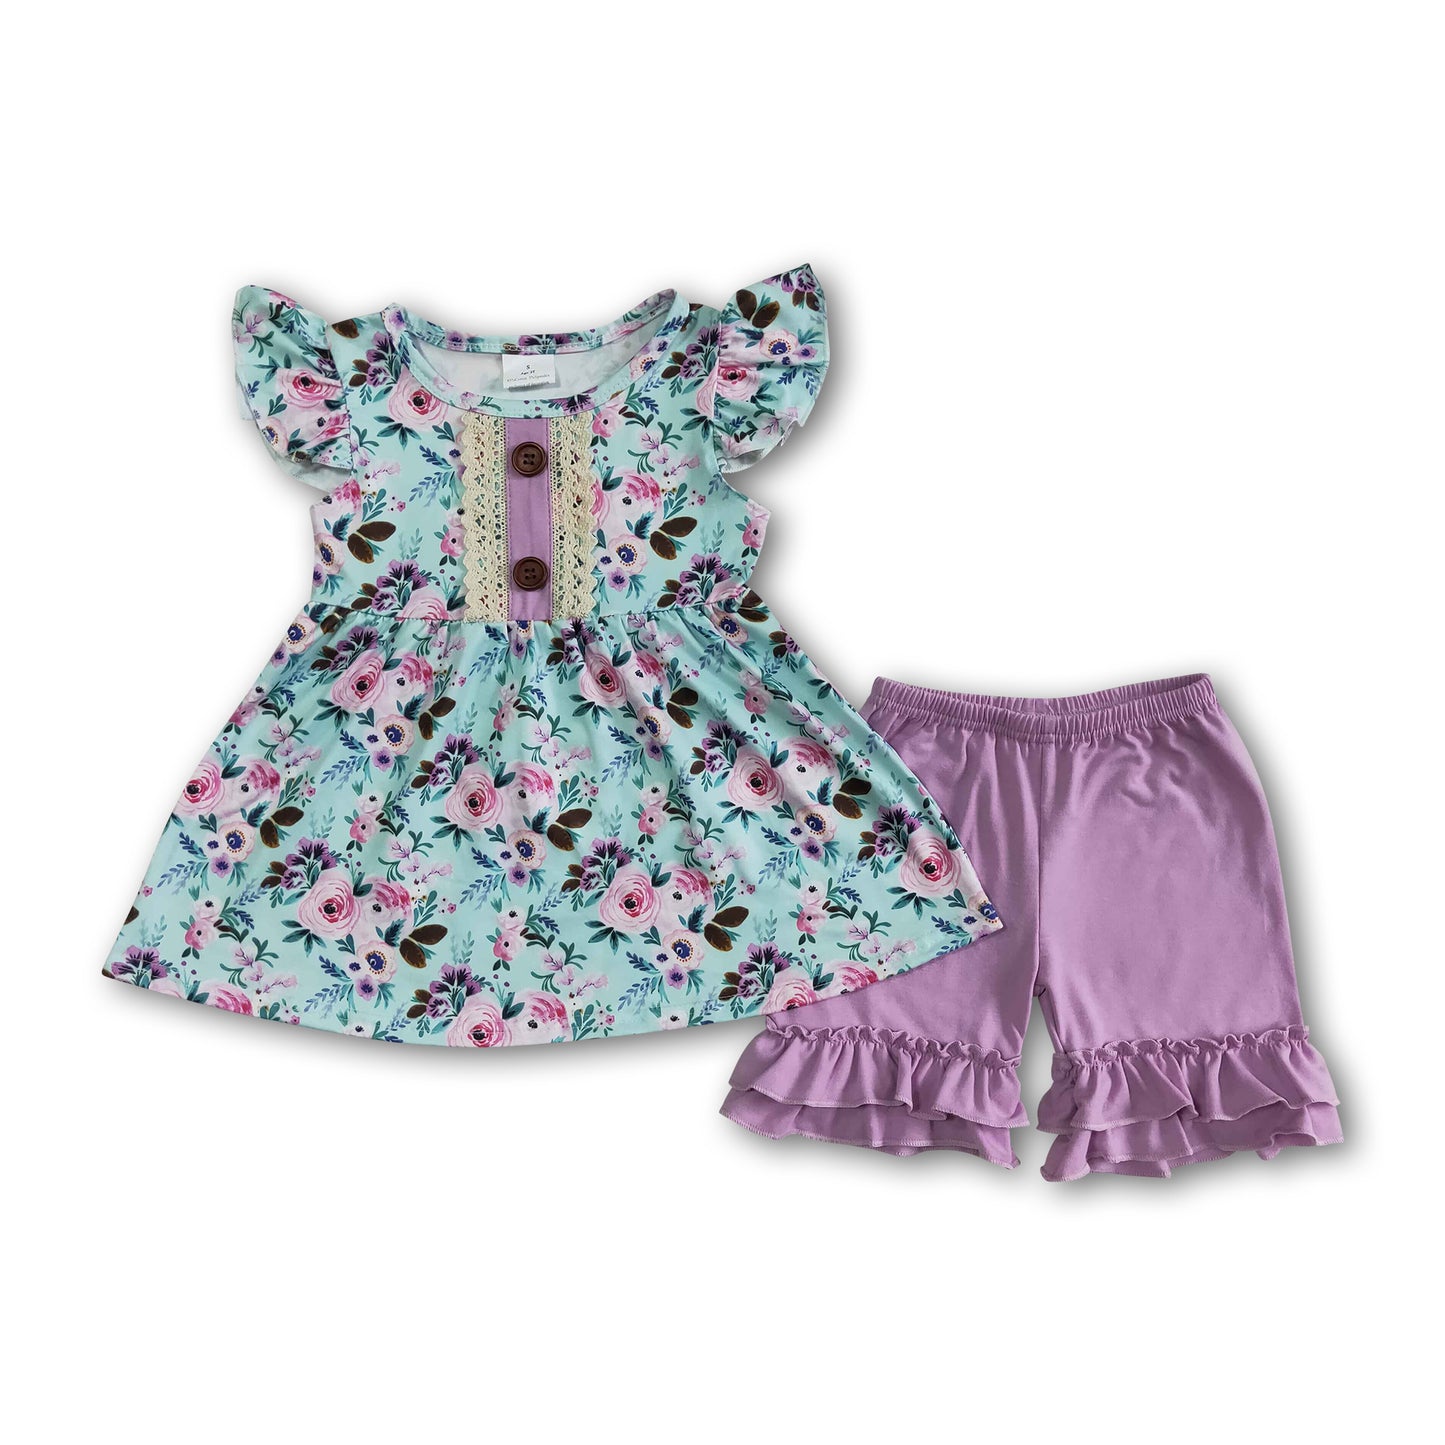 Girl floral tunic ruffle shorts outfit